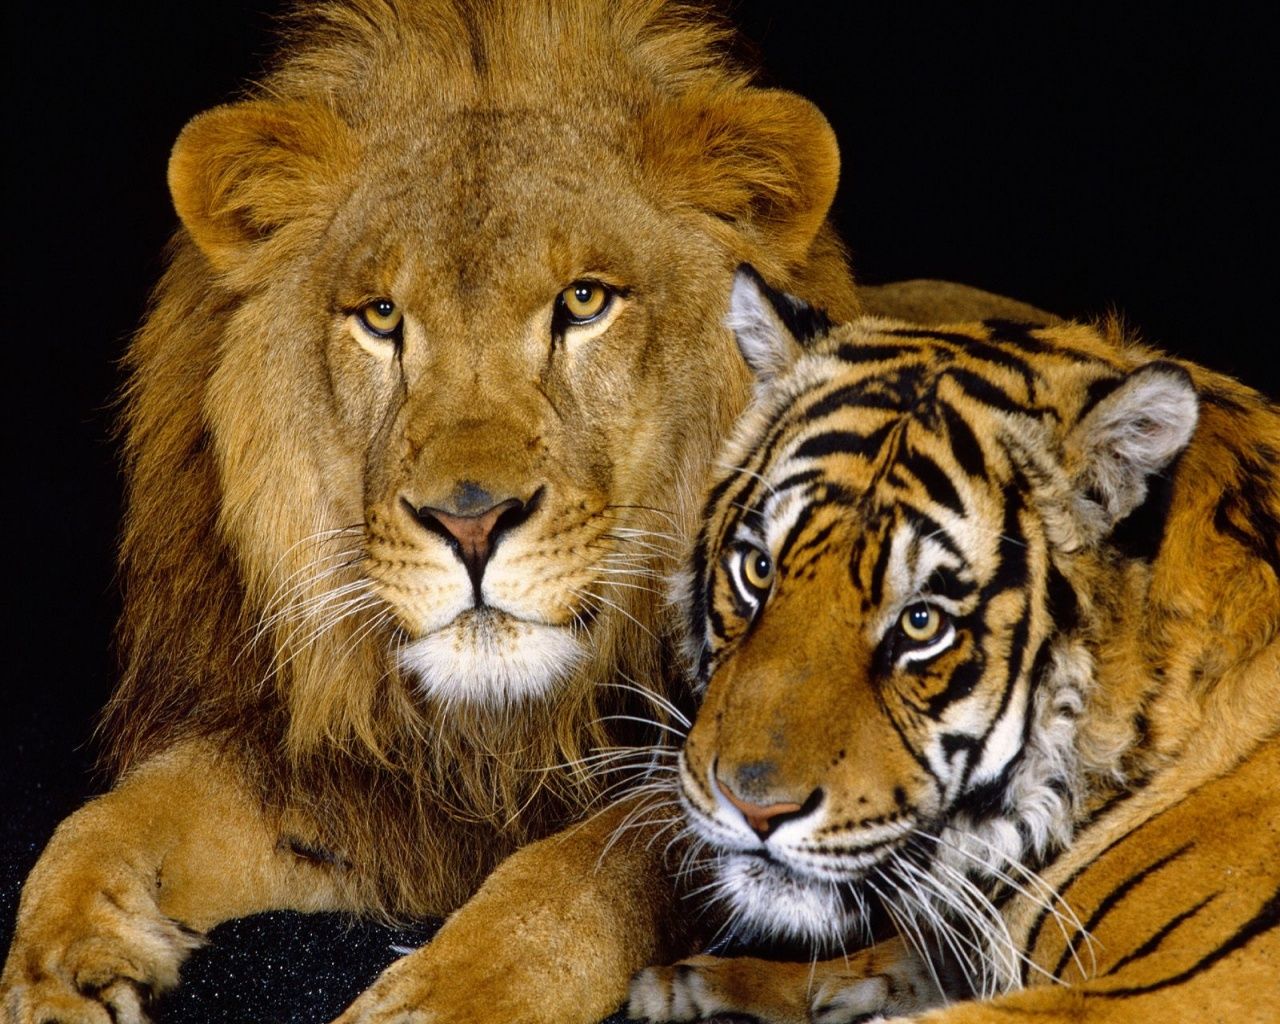 1280x1024 Lion and tiger desktop PC and Mac wallpaper